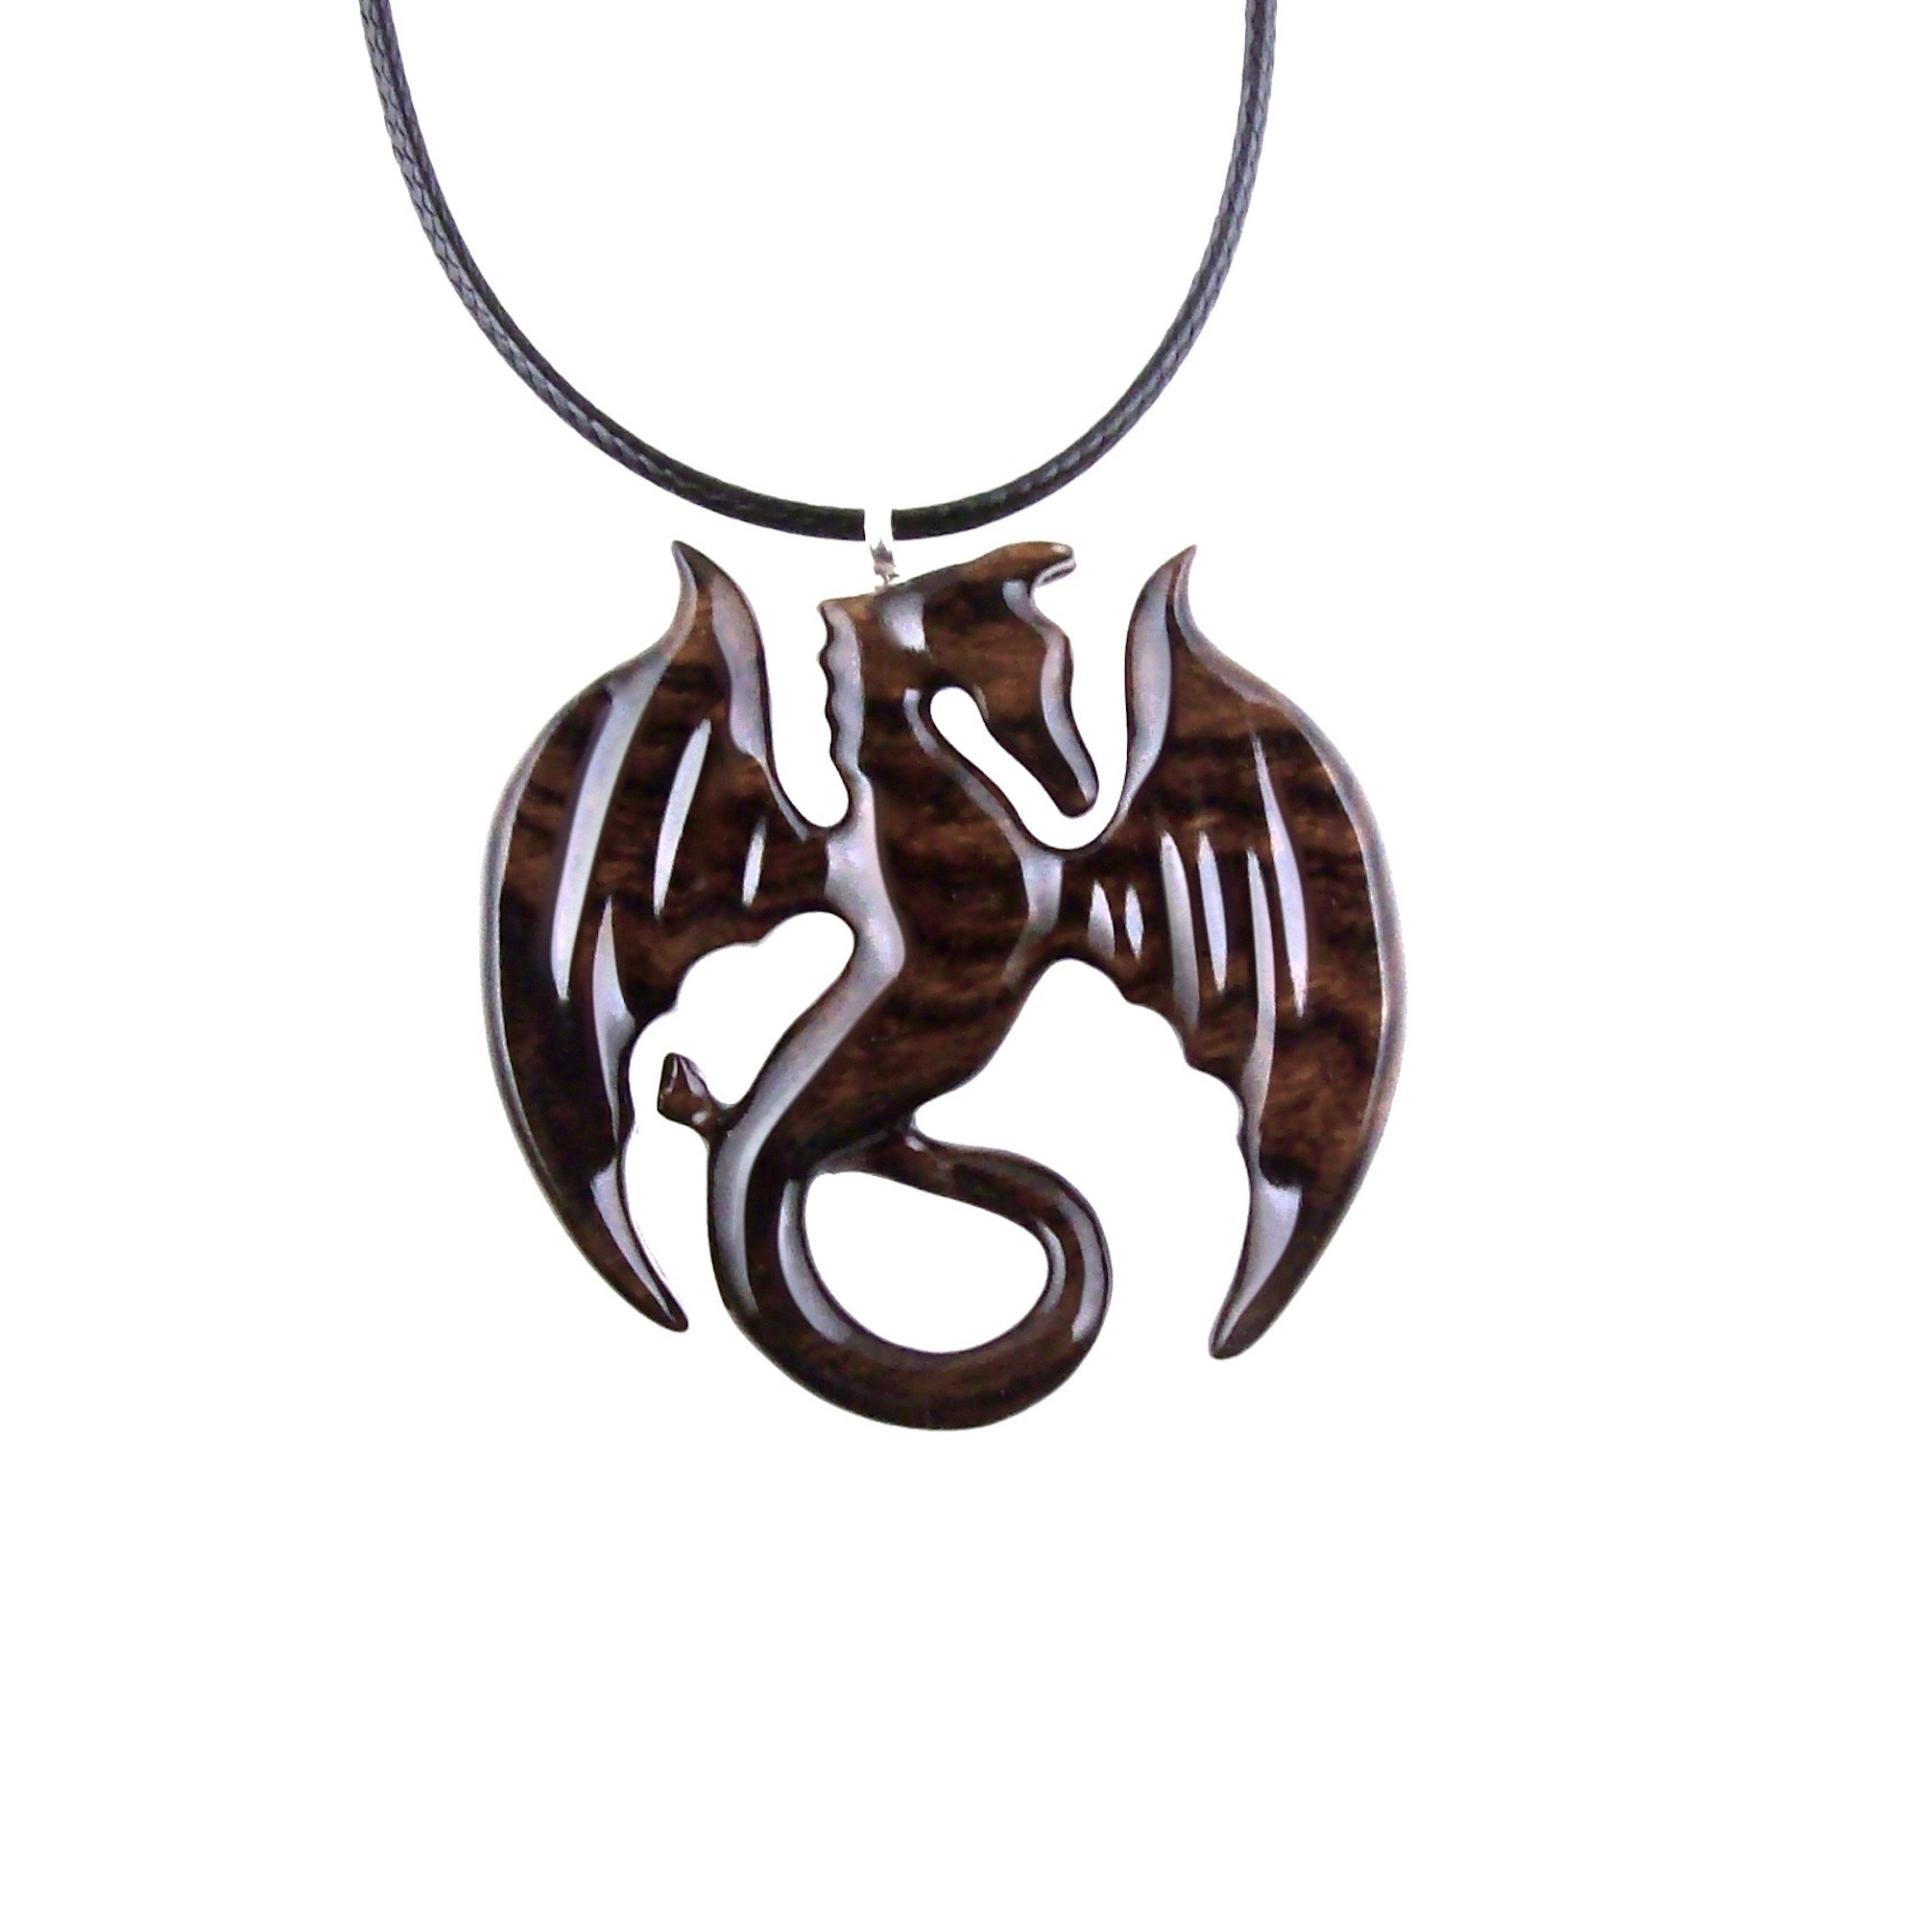 Wooden Dragon Pendant, Hand Carved Dragon Necklace, One of a Kind Fantasy Wood Necklace for Men or Women, Gift for Her Him